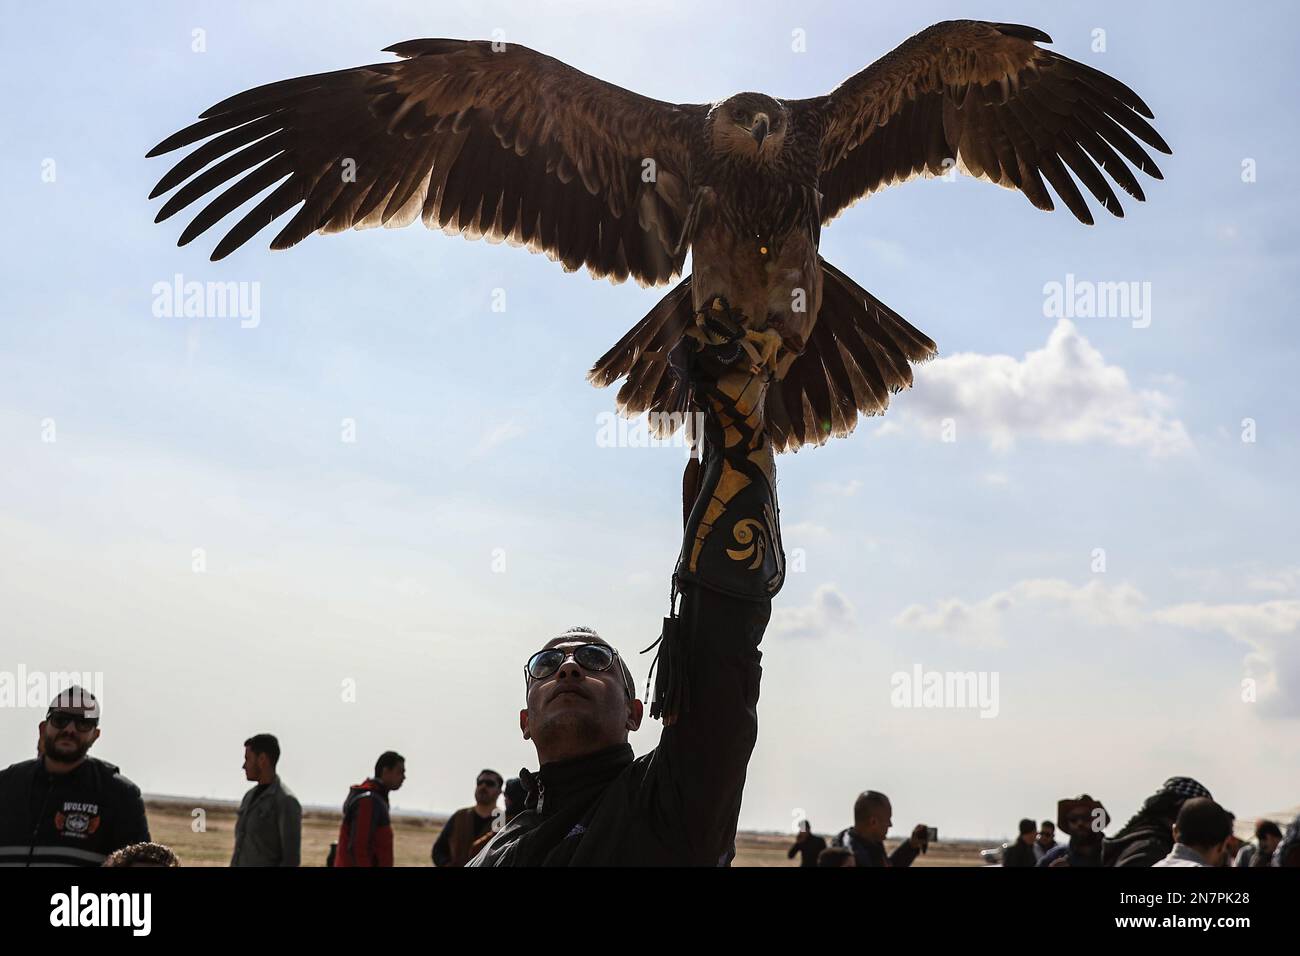 Borg El Arab, Egypt. 10th Feb, 2023. A falconer holds up a golden eagle during Horus race for birds of prey, organized by Egypt Falconers Club in the desert of Borg al-Arab near Alexandria. The race is named after the ancient Egyptian falcon-headed god 'Horus' and brings falconers from across Egypt to show their raptor's skills in hunting and flight speed. Credit: Gehad Hamdy/dpa/Alamy Live News Stock Photo